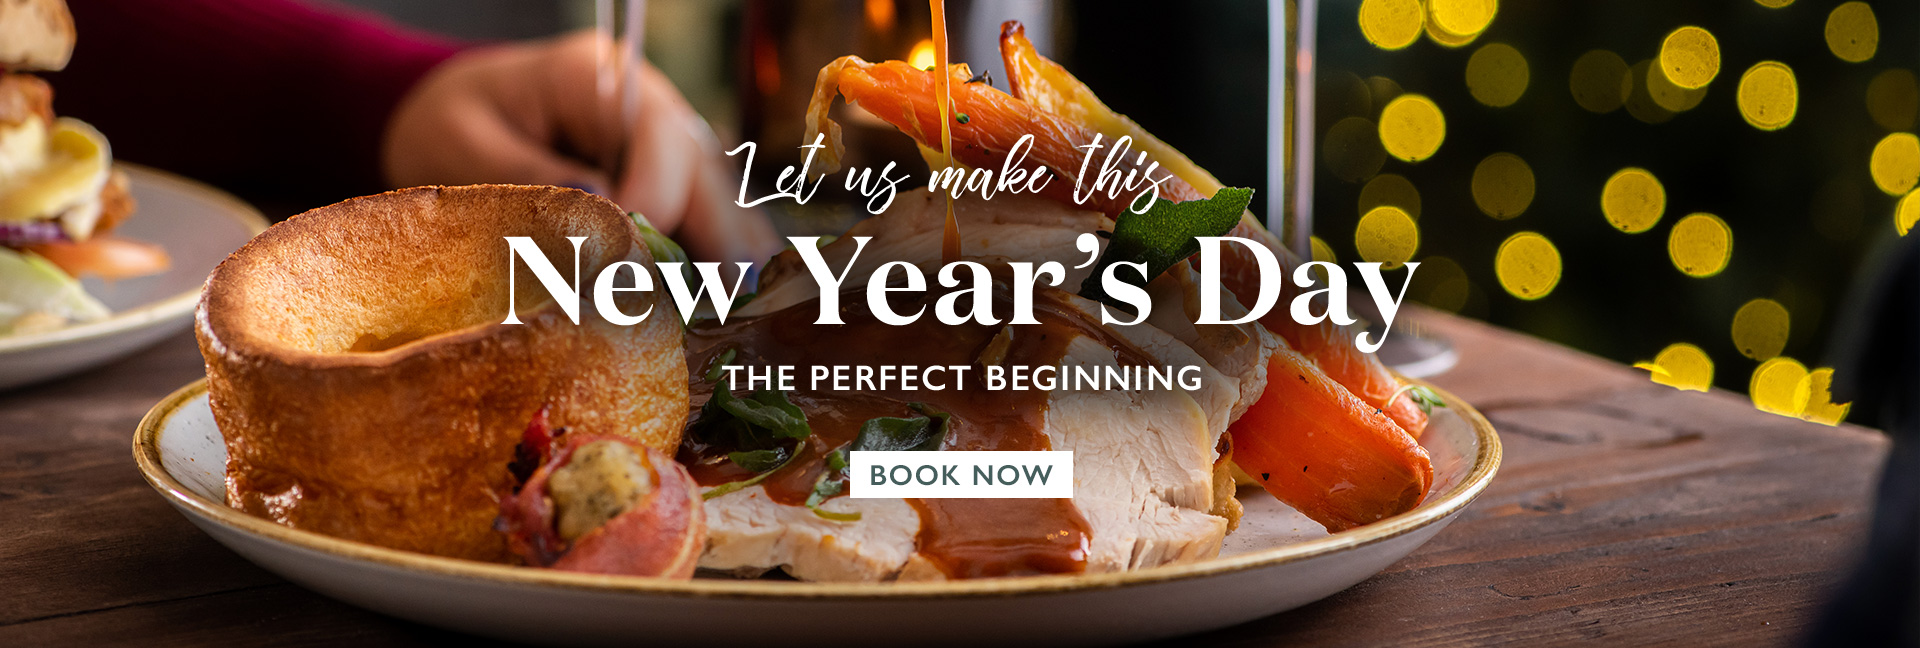 New Year’s Day Menu at The Crown, Ardleigh 